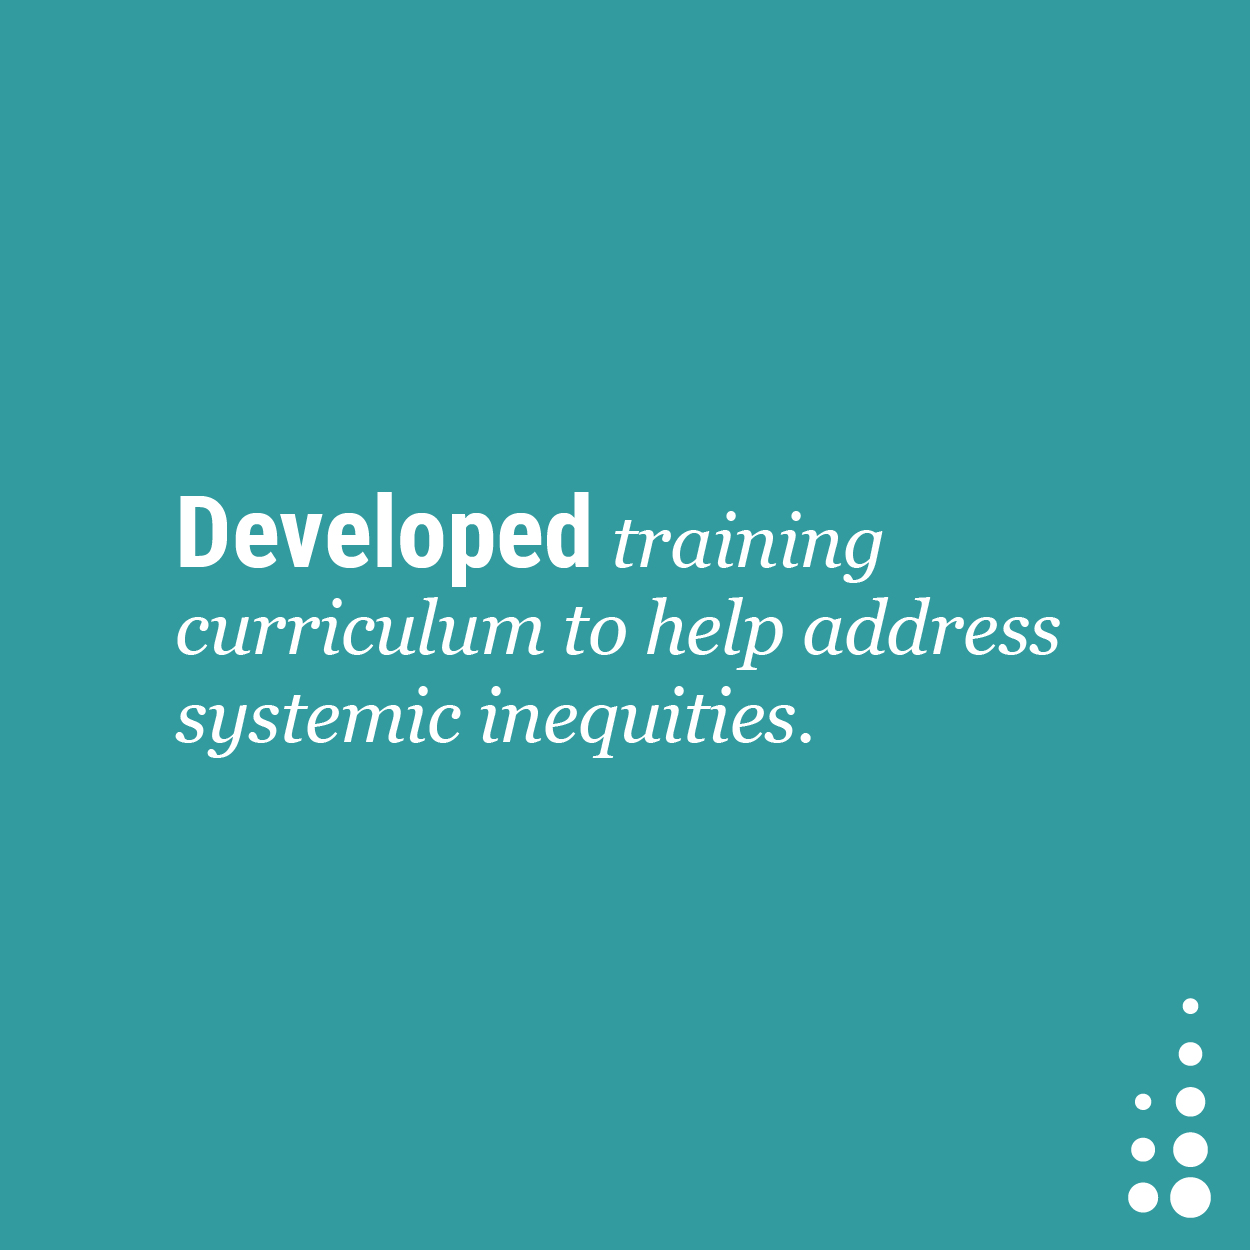 Developed training curriculum to help address systemic inequities.